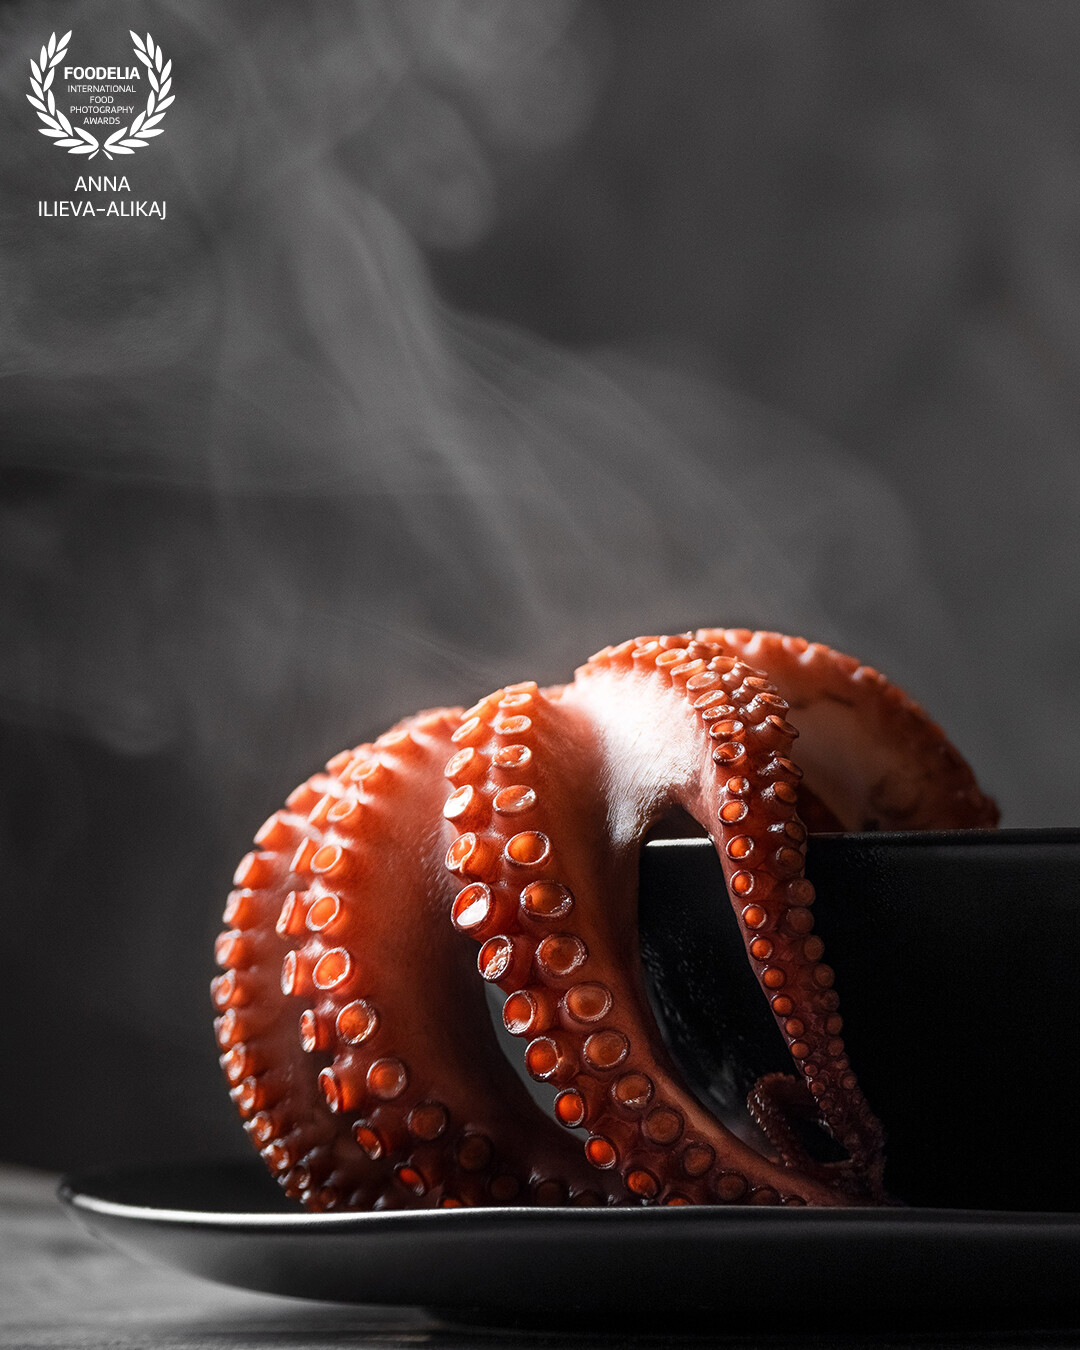 Modern minimal style and shot in low key for stand up the beauty of this octopus tentacles.